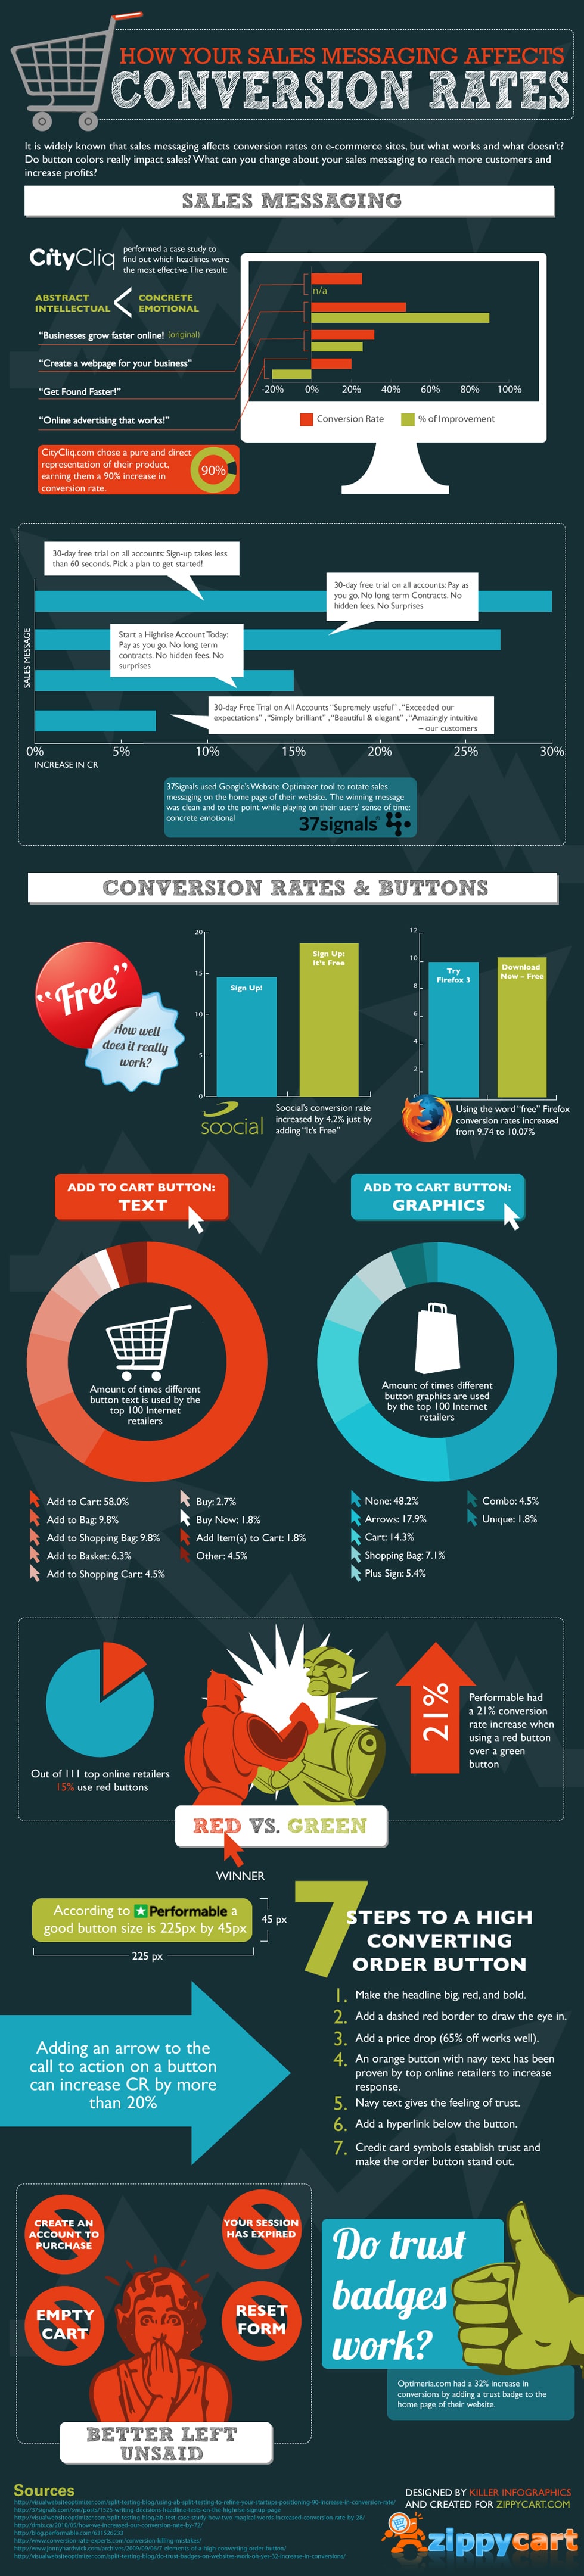 Sales messaging and conversion rates infographic